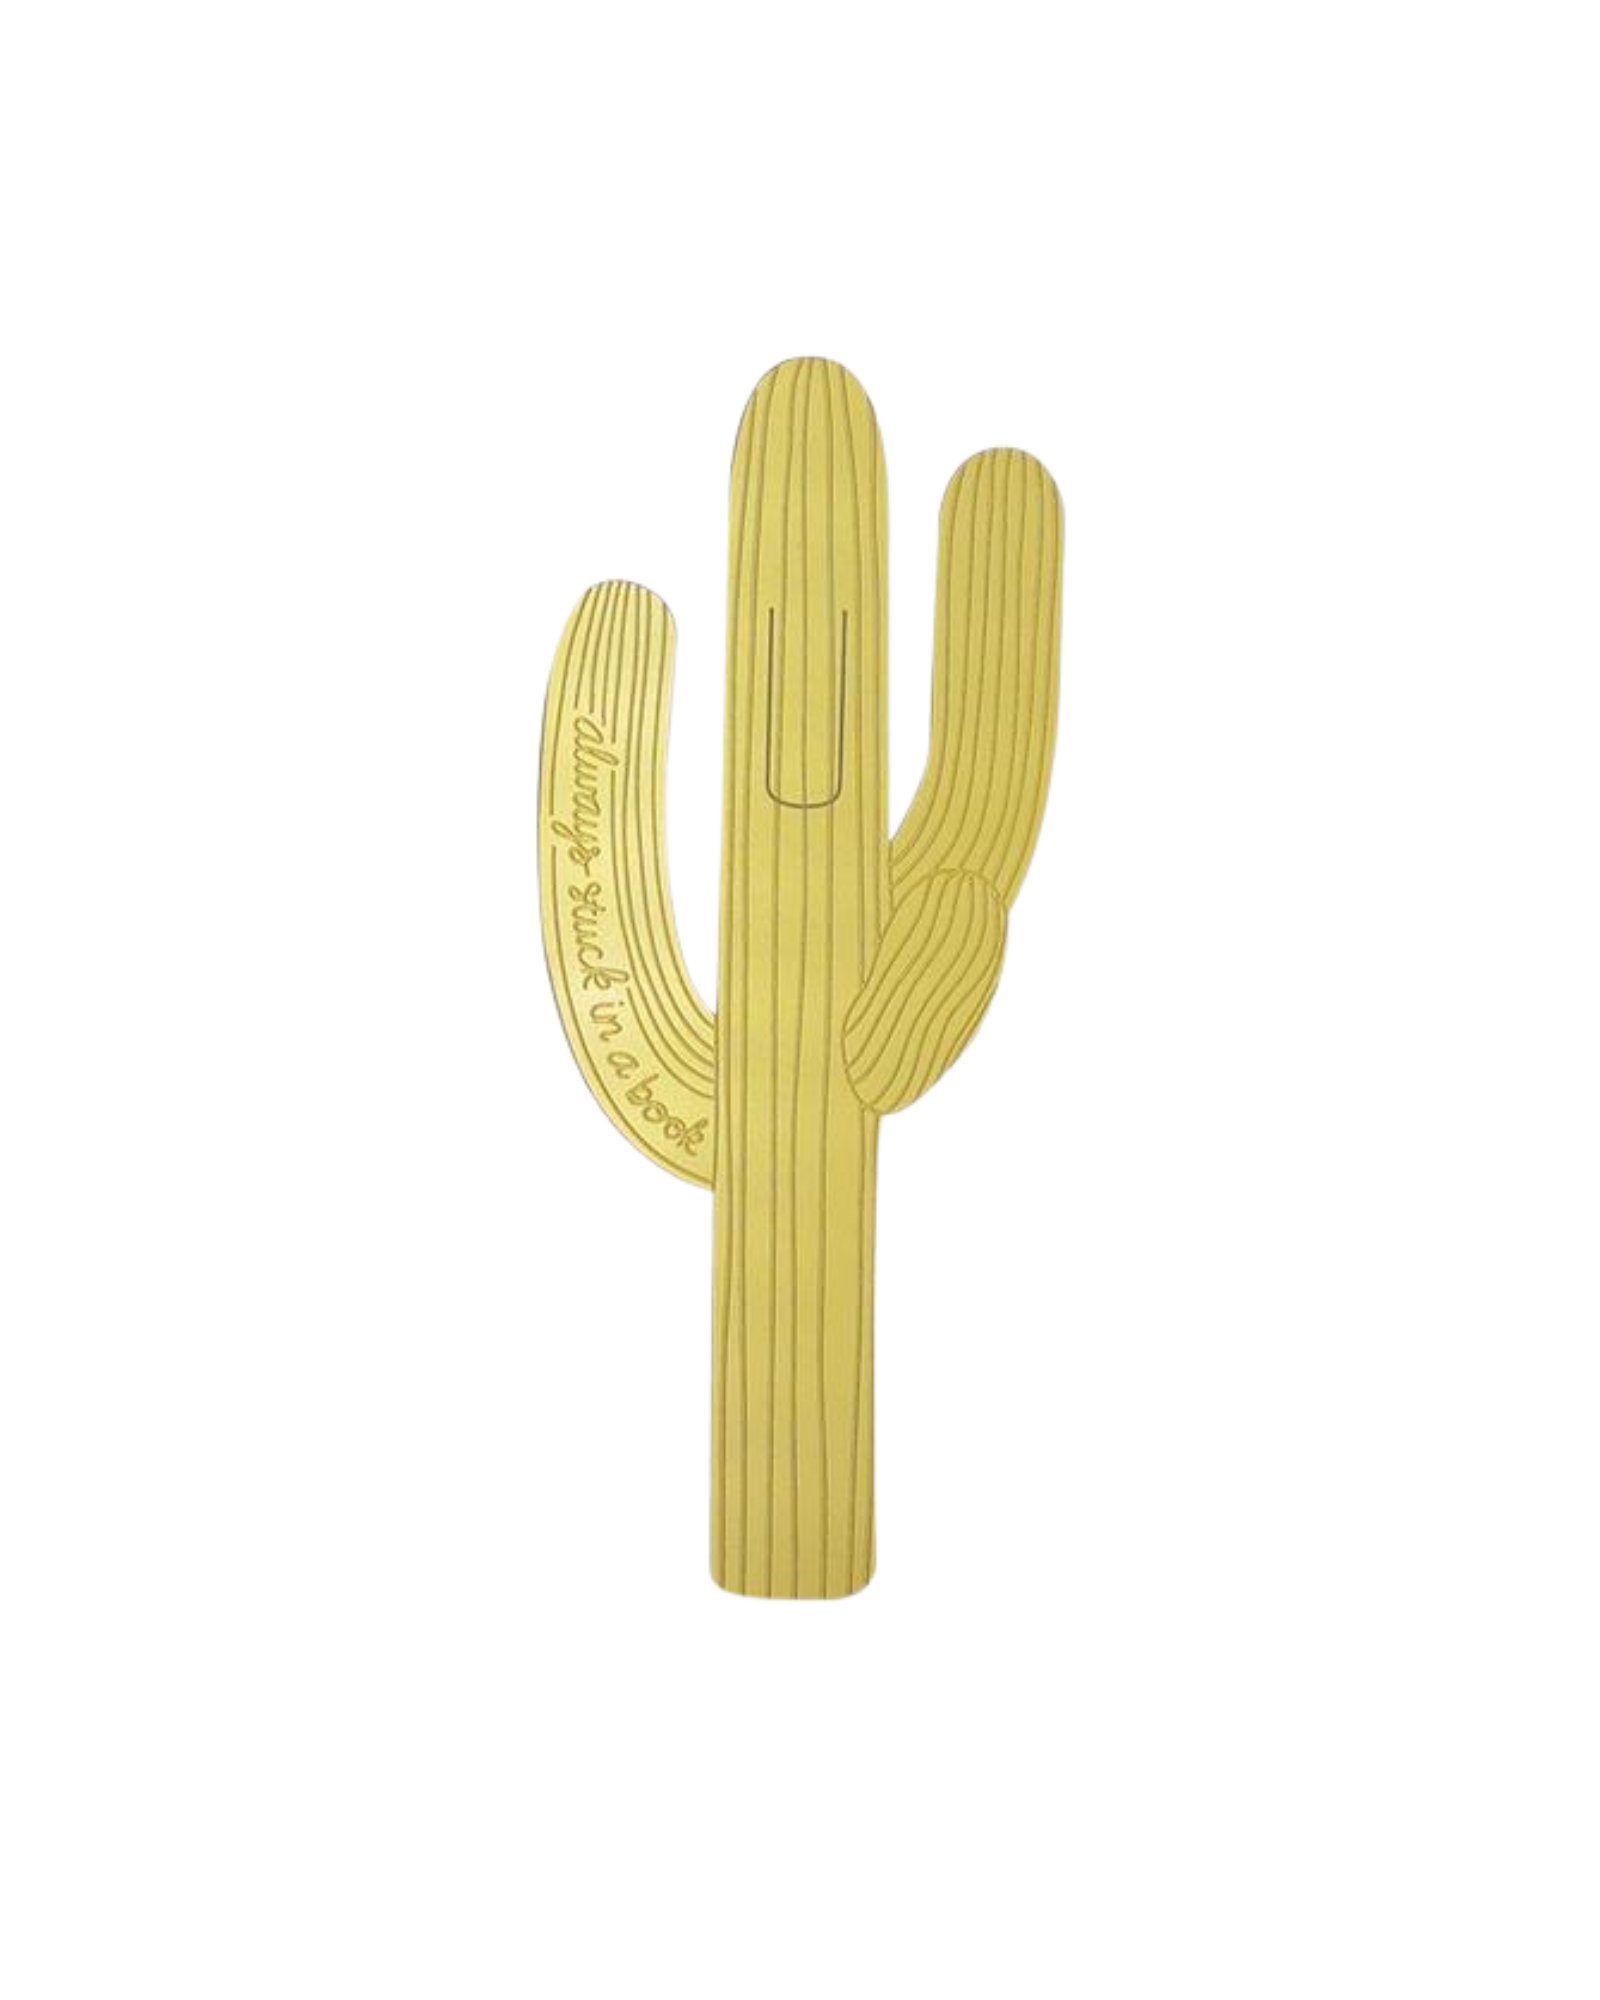 Brass saguaro shaped bookmark with the words "always stuck in a book" engraved in cursive script on one of the saguaro's arms